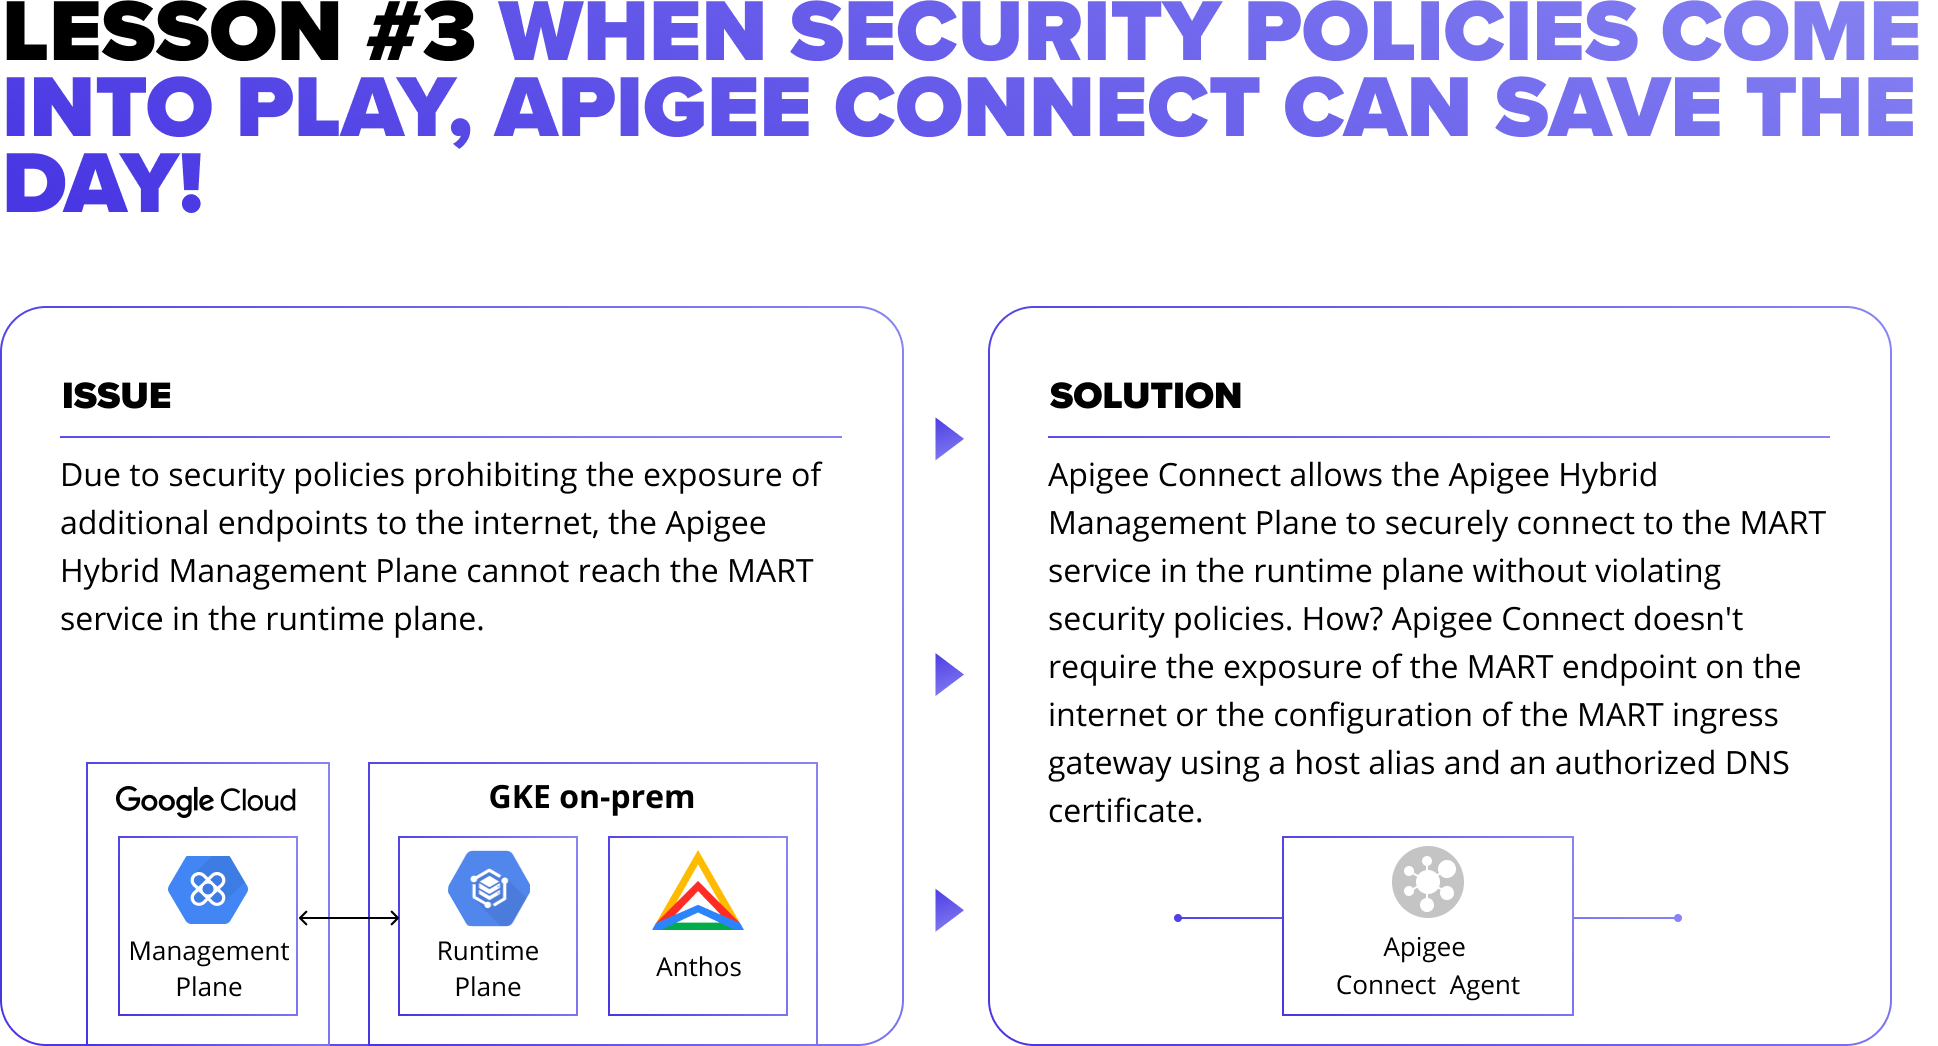 LESSON #3: WHEN SECURITY POLICIES COME INTO PLAY, APIGEE CONNECT CAN SAVE THE DAY!